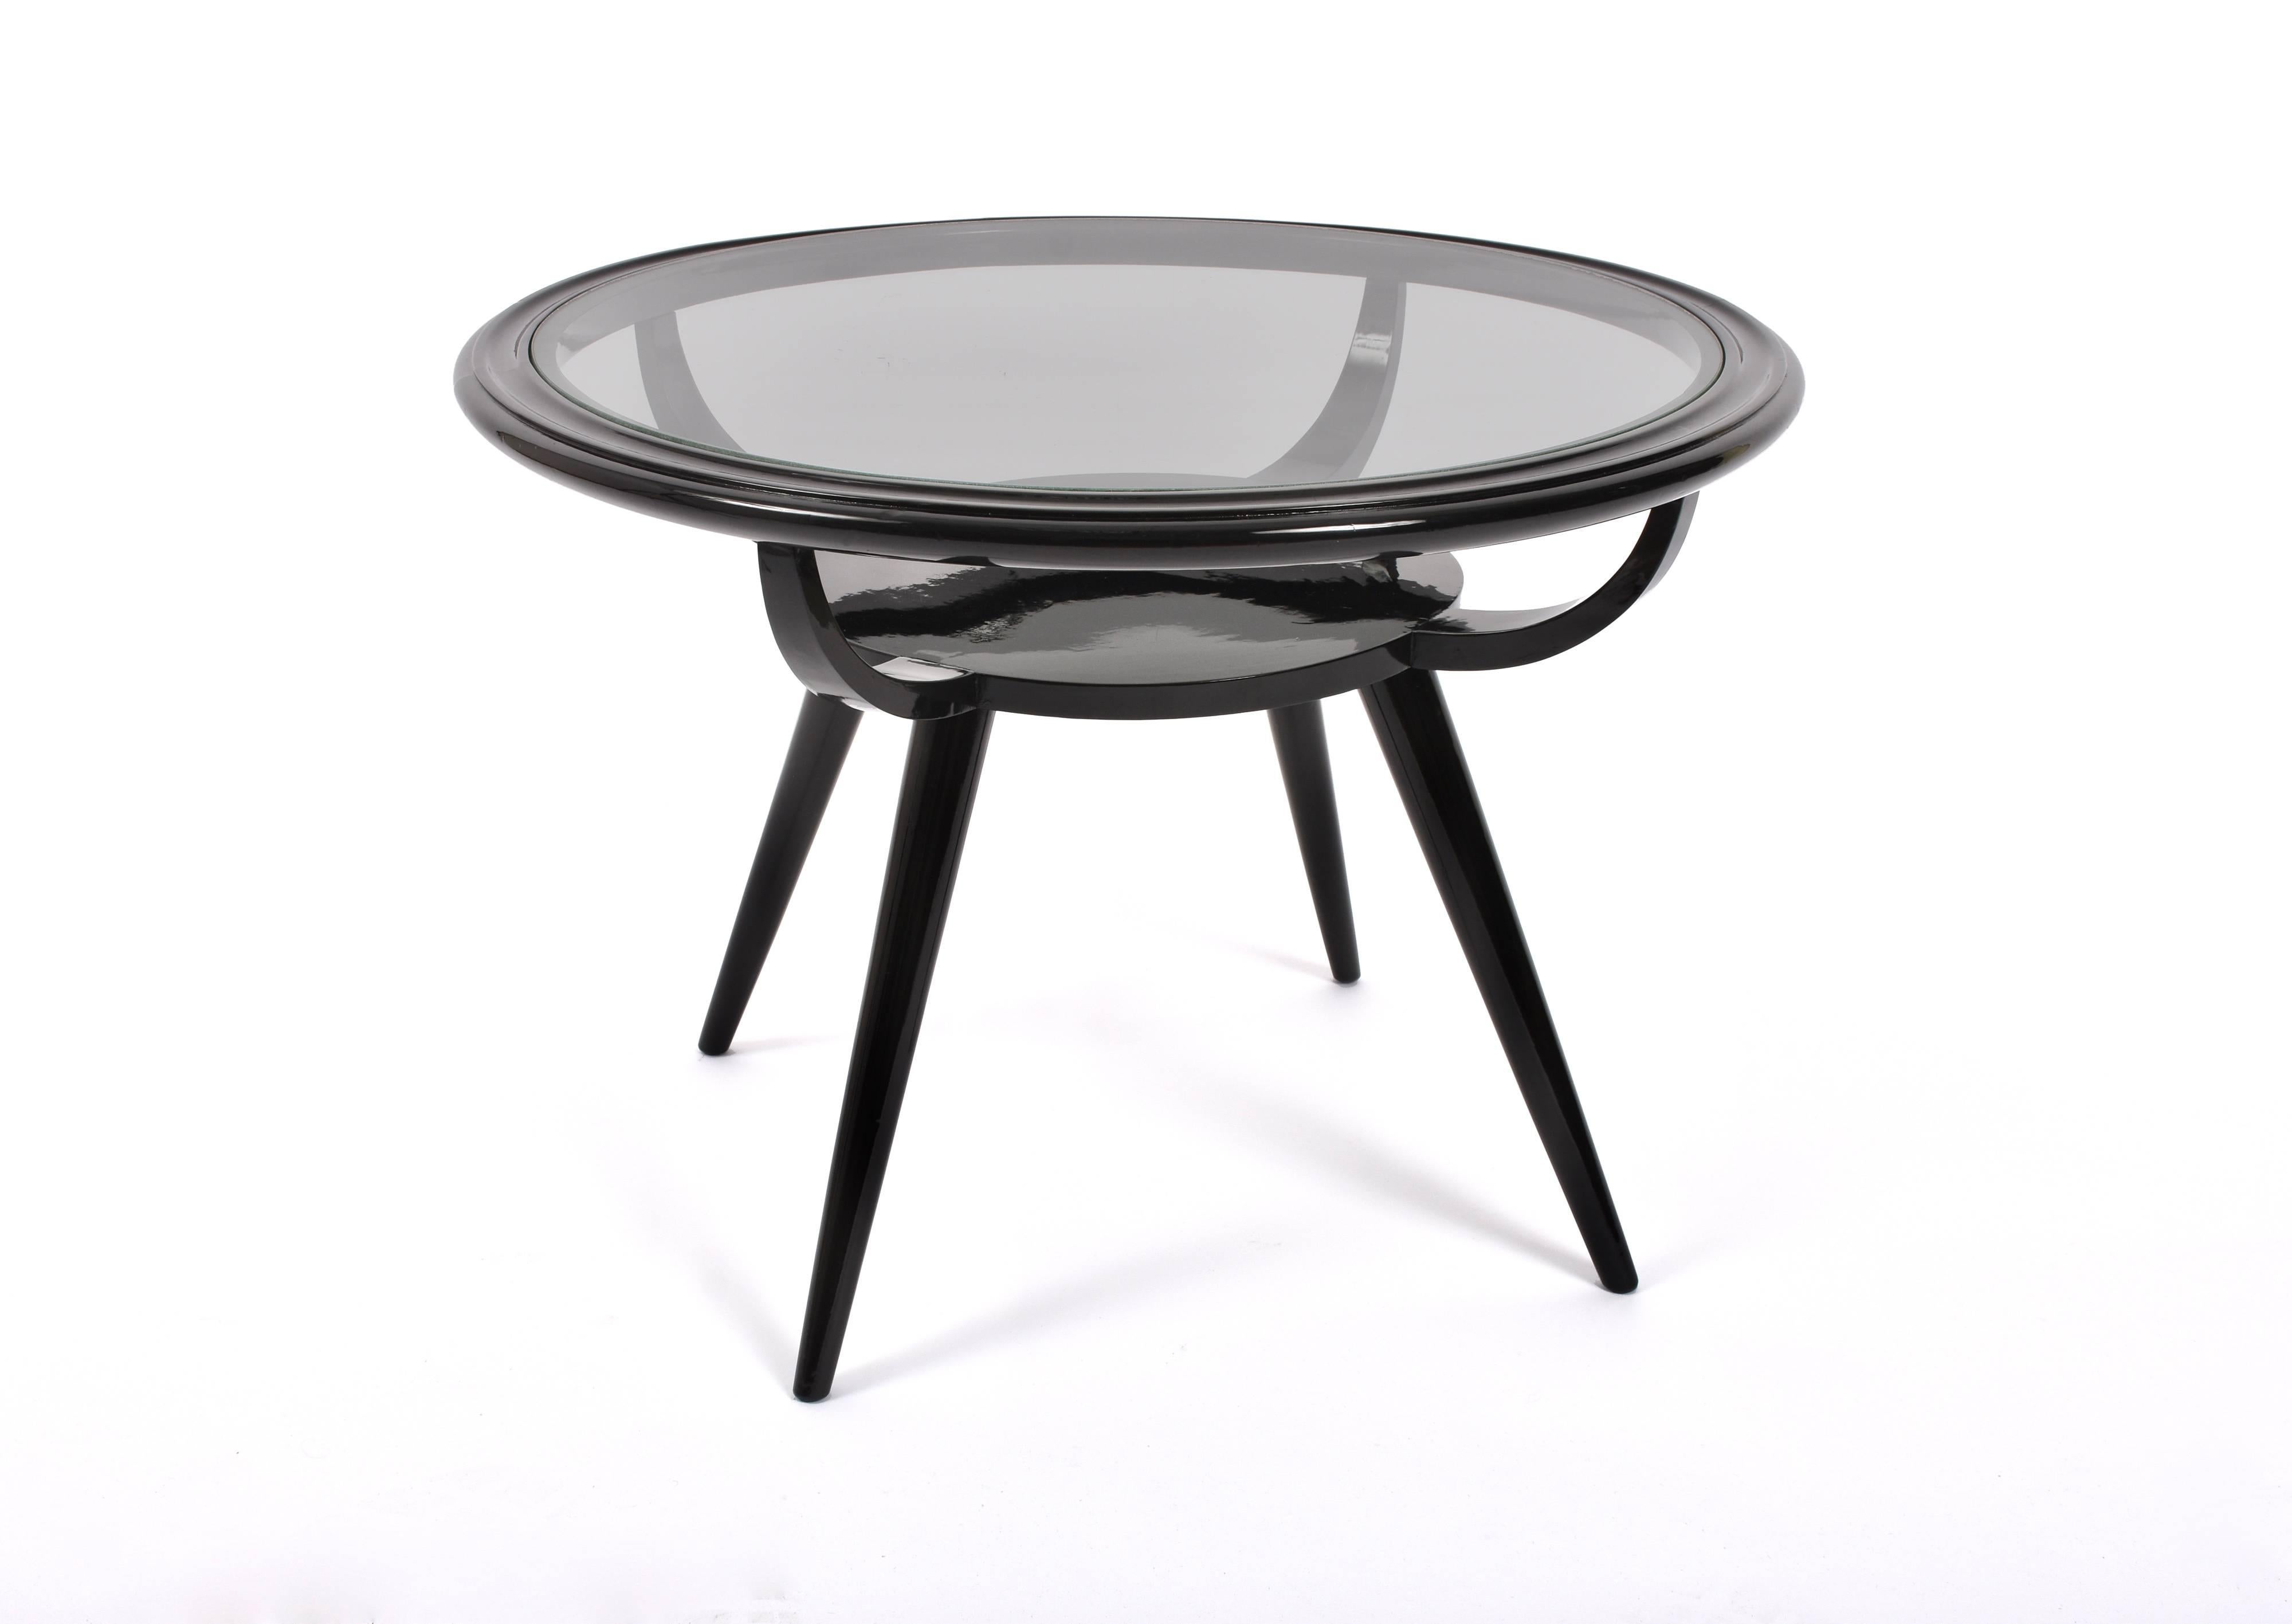 Italian coffee table Art Deco 1940s round wood lacquered black glass top.
In the style of Ico Parisi
Professionally restored.